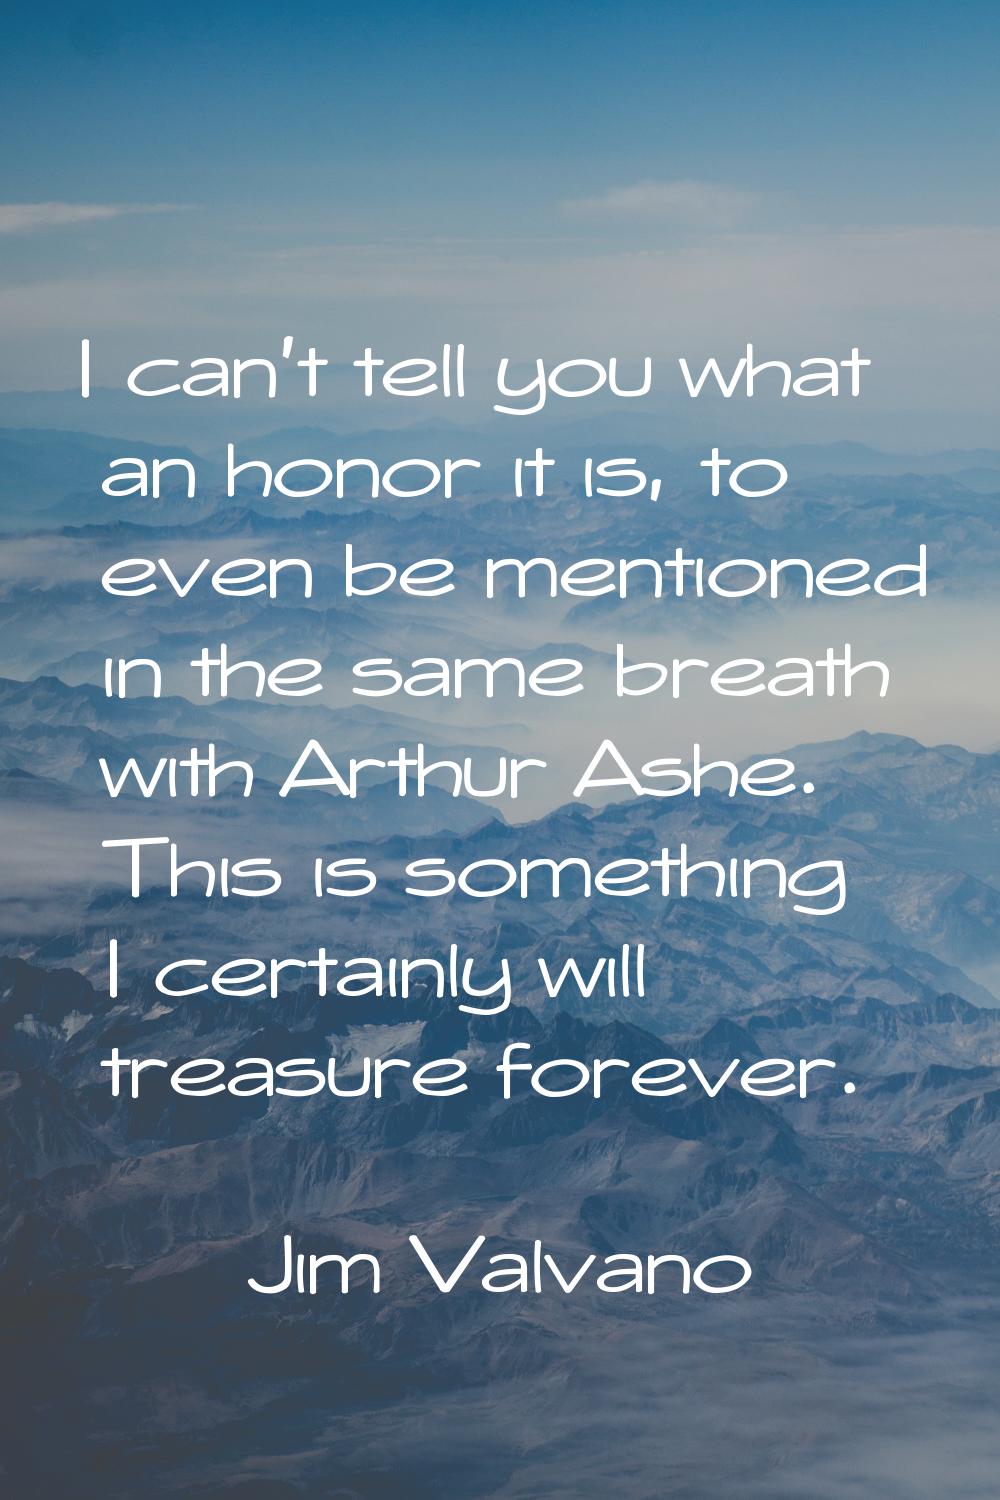 I can't tell you what an honor it is, to even be mentioned in the same breath with Arthur Ashe. Thi